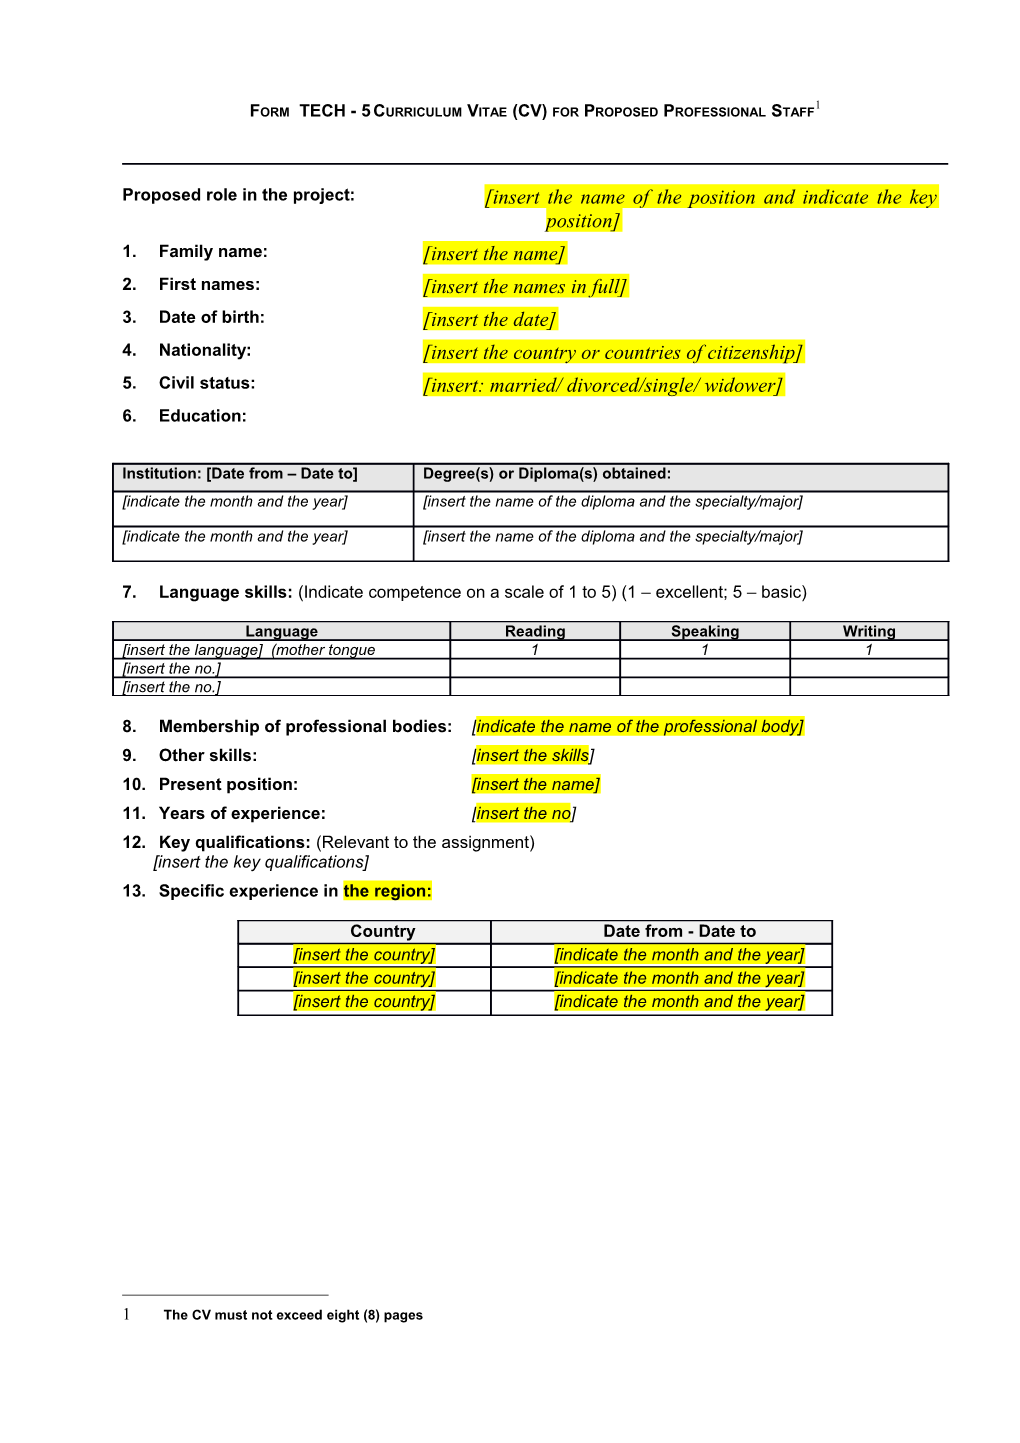 Form TECH - 5Curriculum Vitae (CV) for Proposed Professional Staff 1